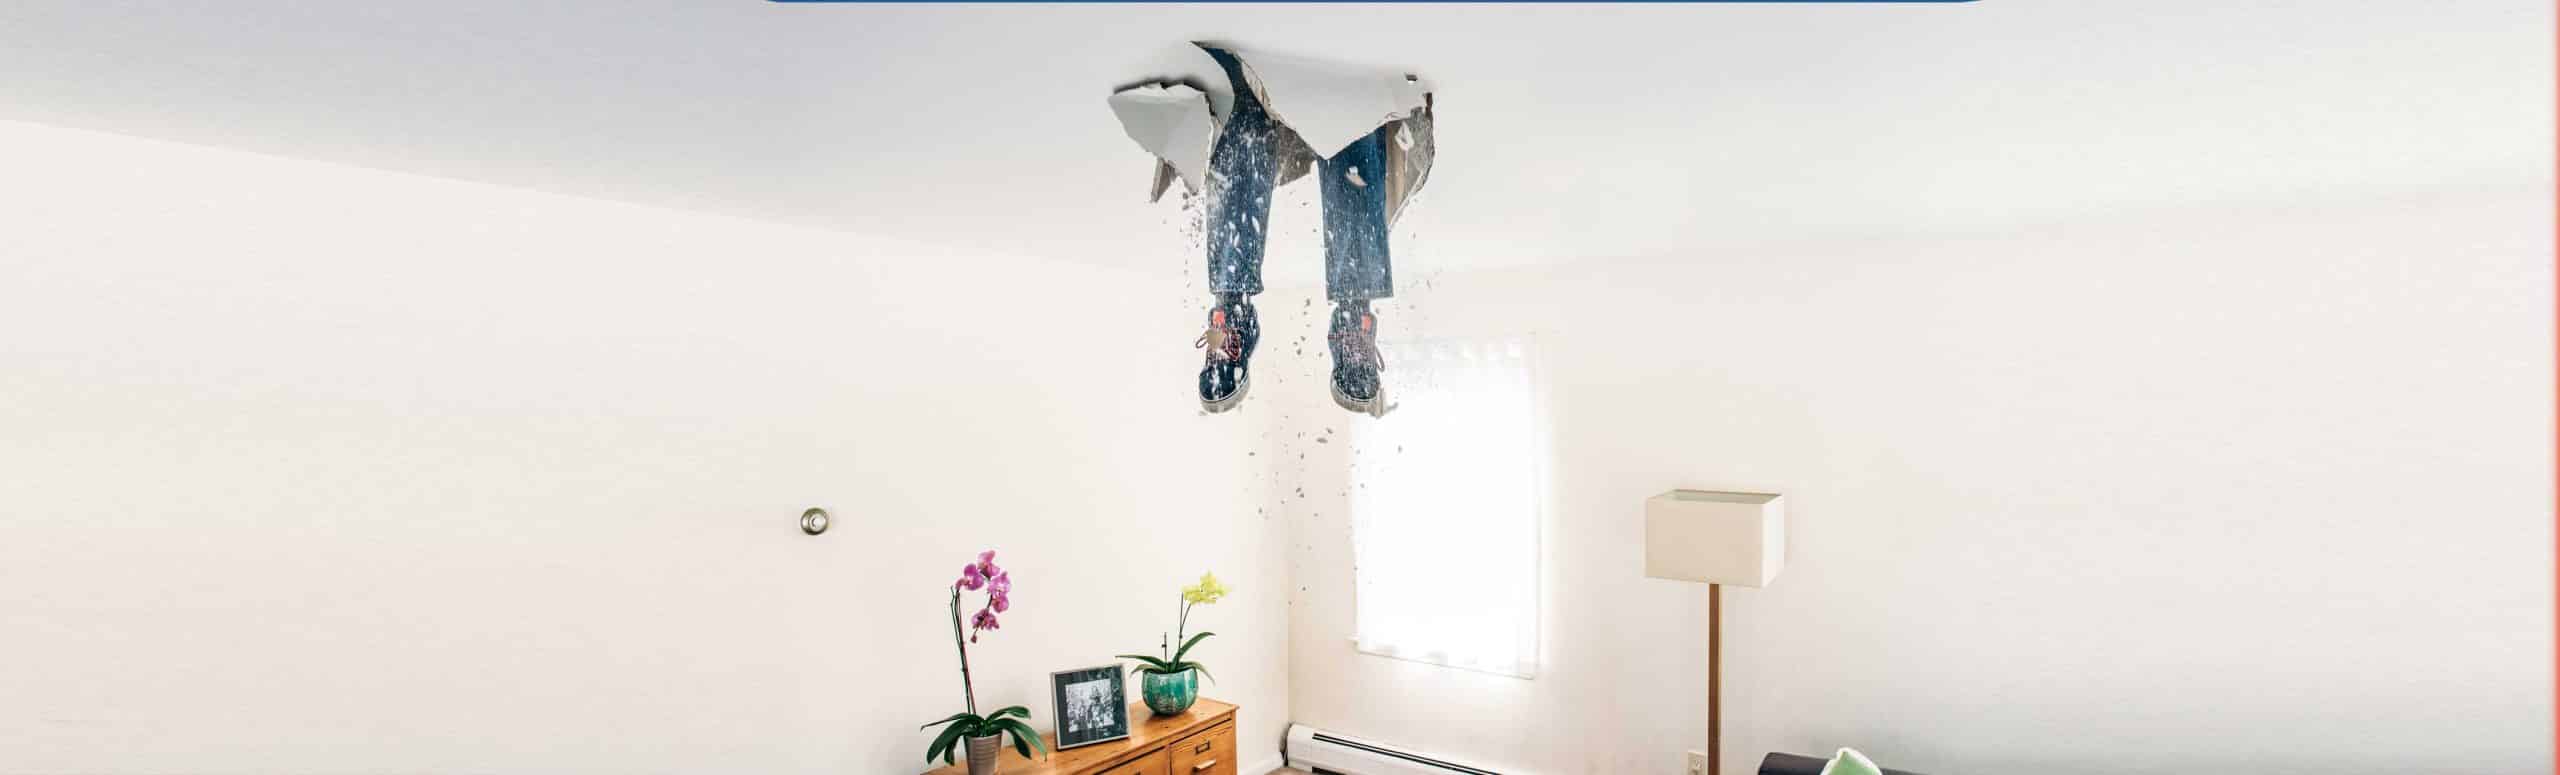 Person falling through ceiling with legs sticking out in an open room